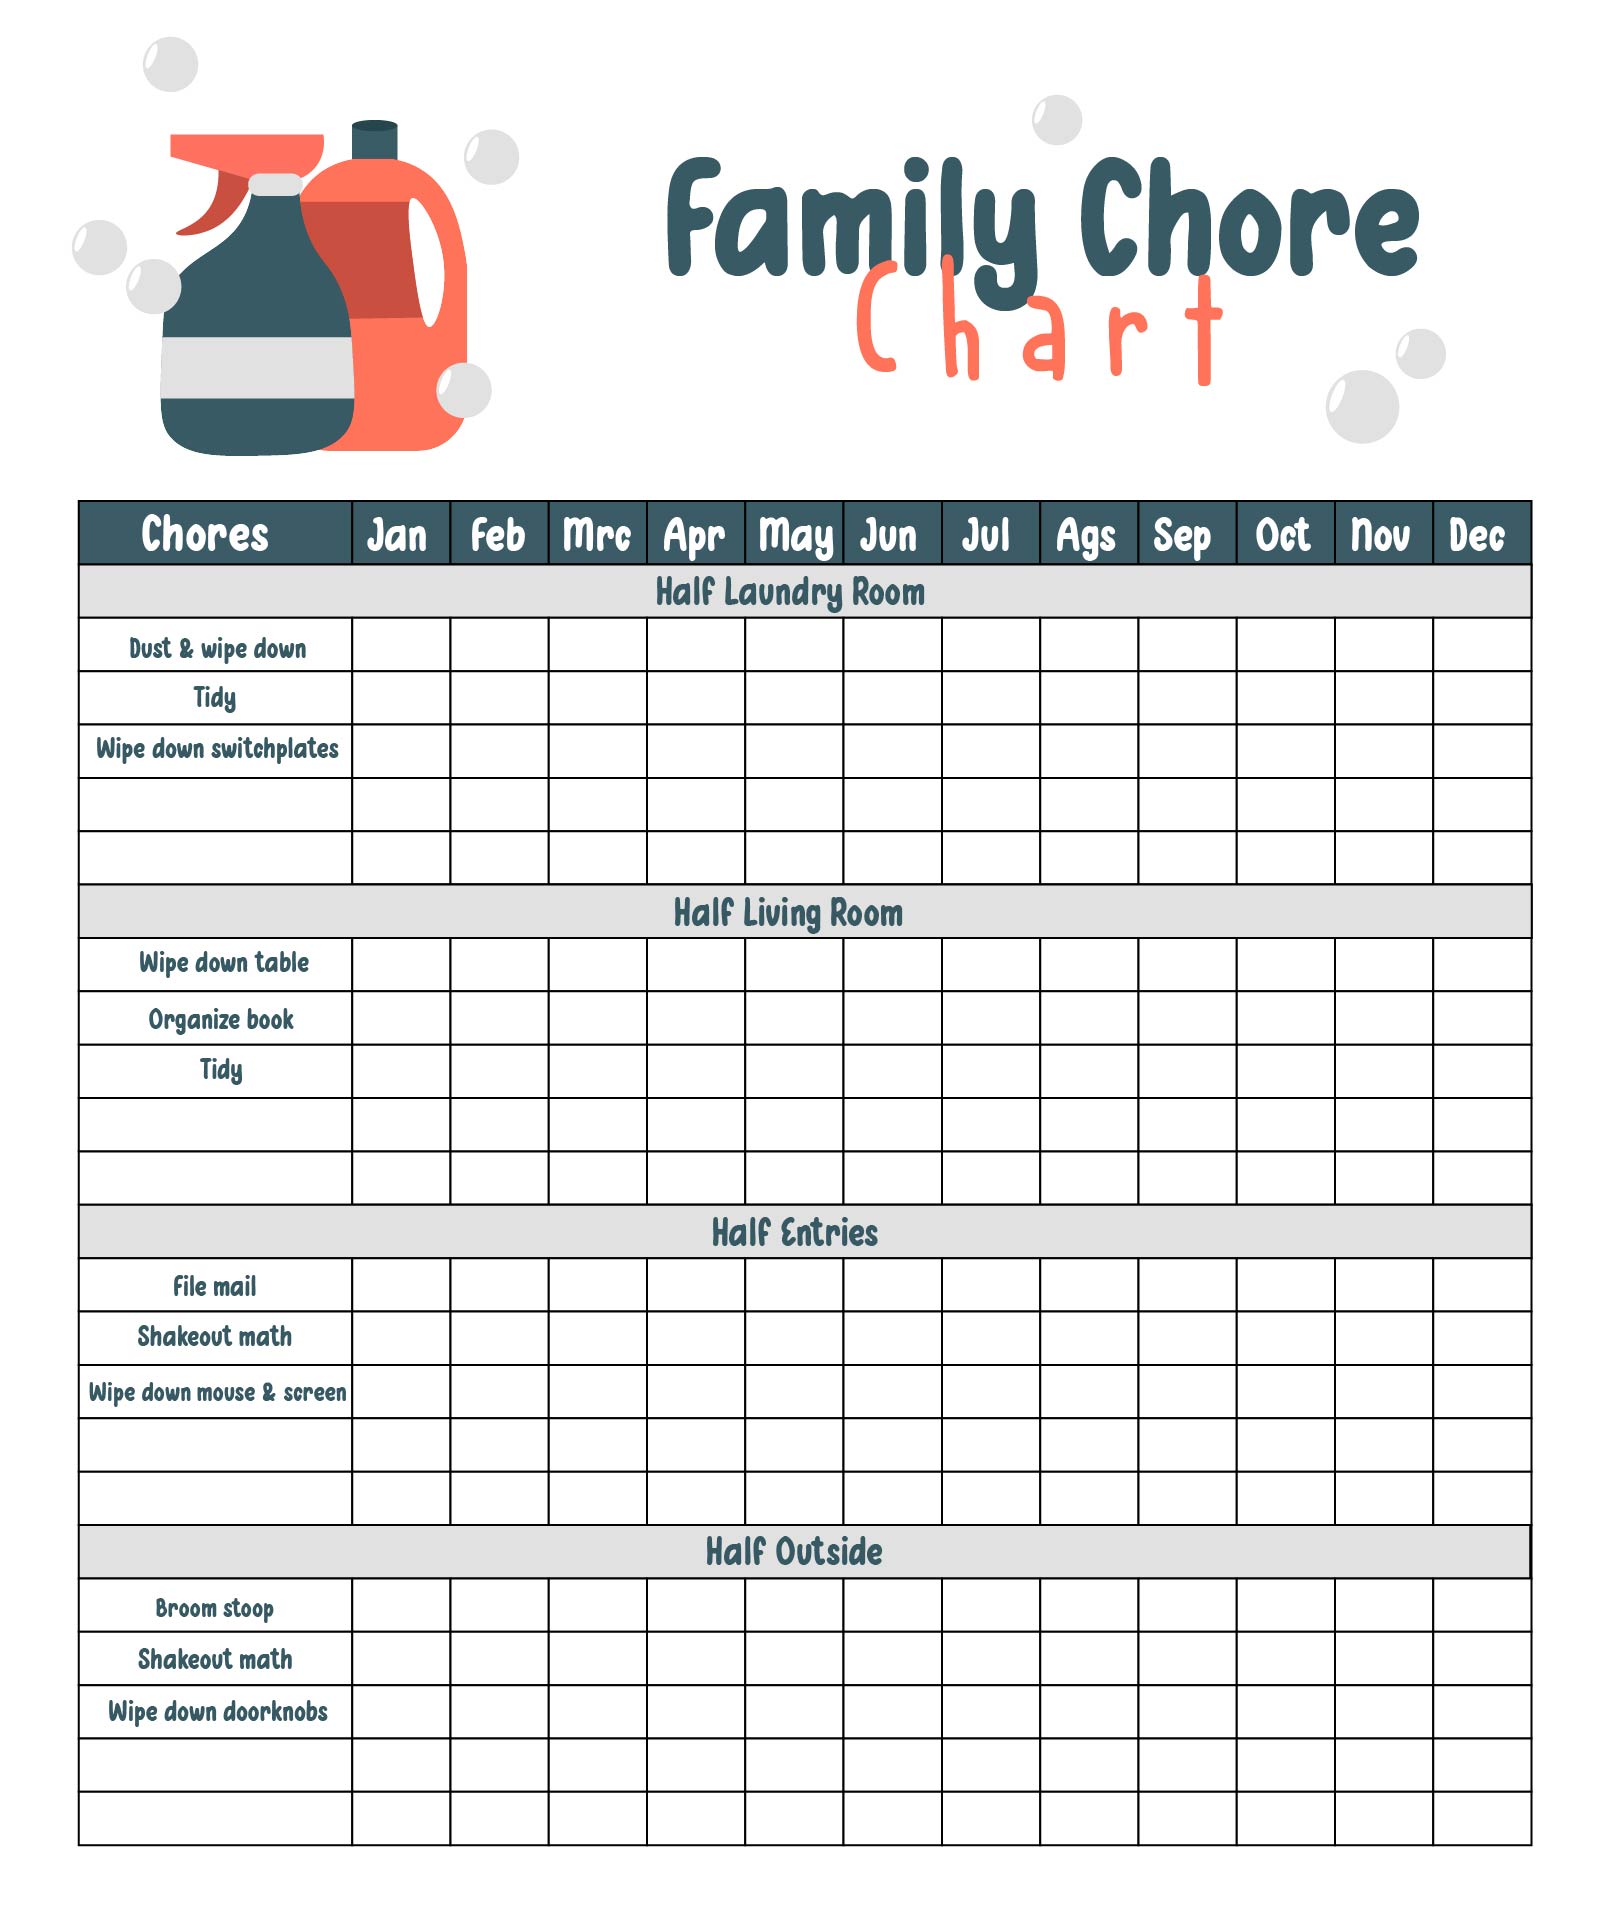 5-best-images-of-large-family-chore-chart-printable-family-chore-chart-template-free